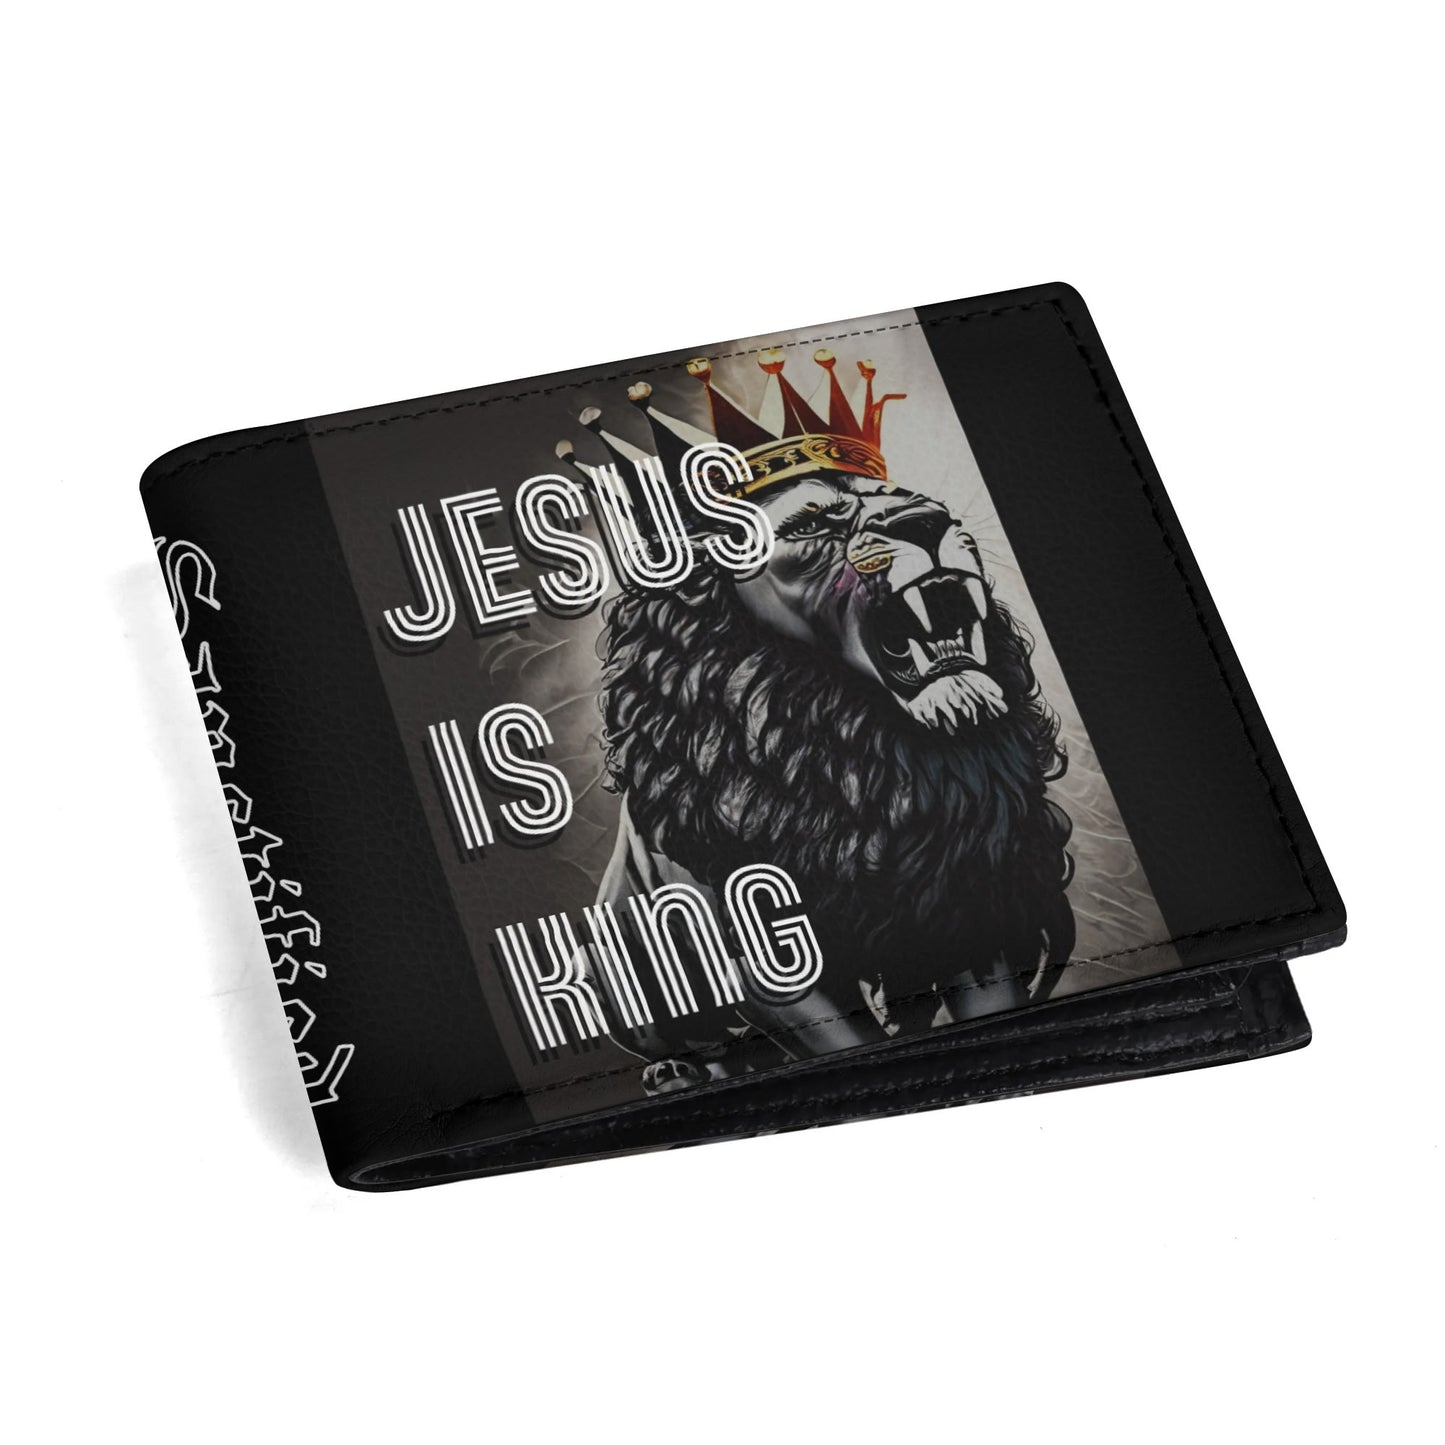 JESUS IS KING- PU Leather Wallet Paper Folded Wallet, FREE SHIPPING